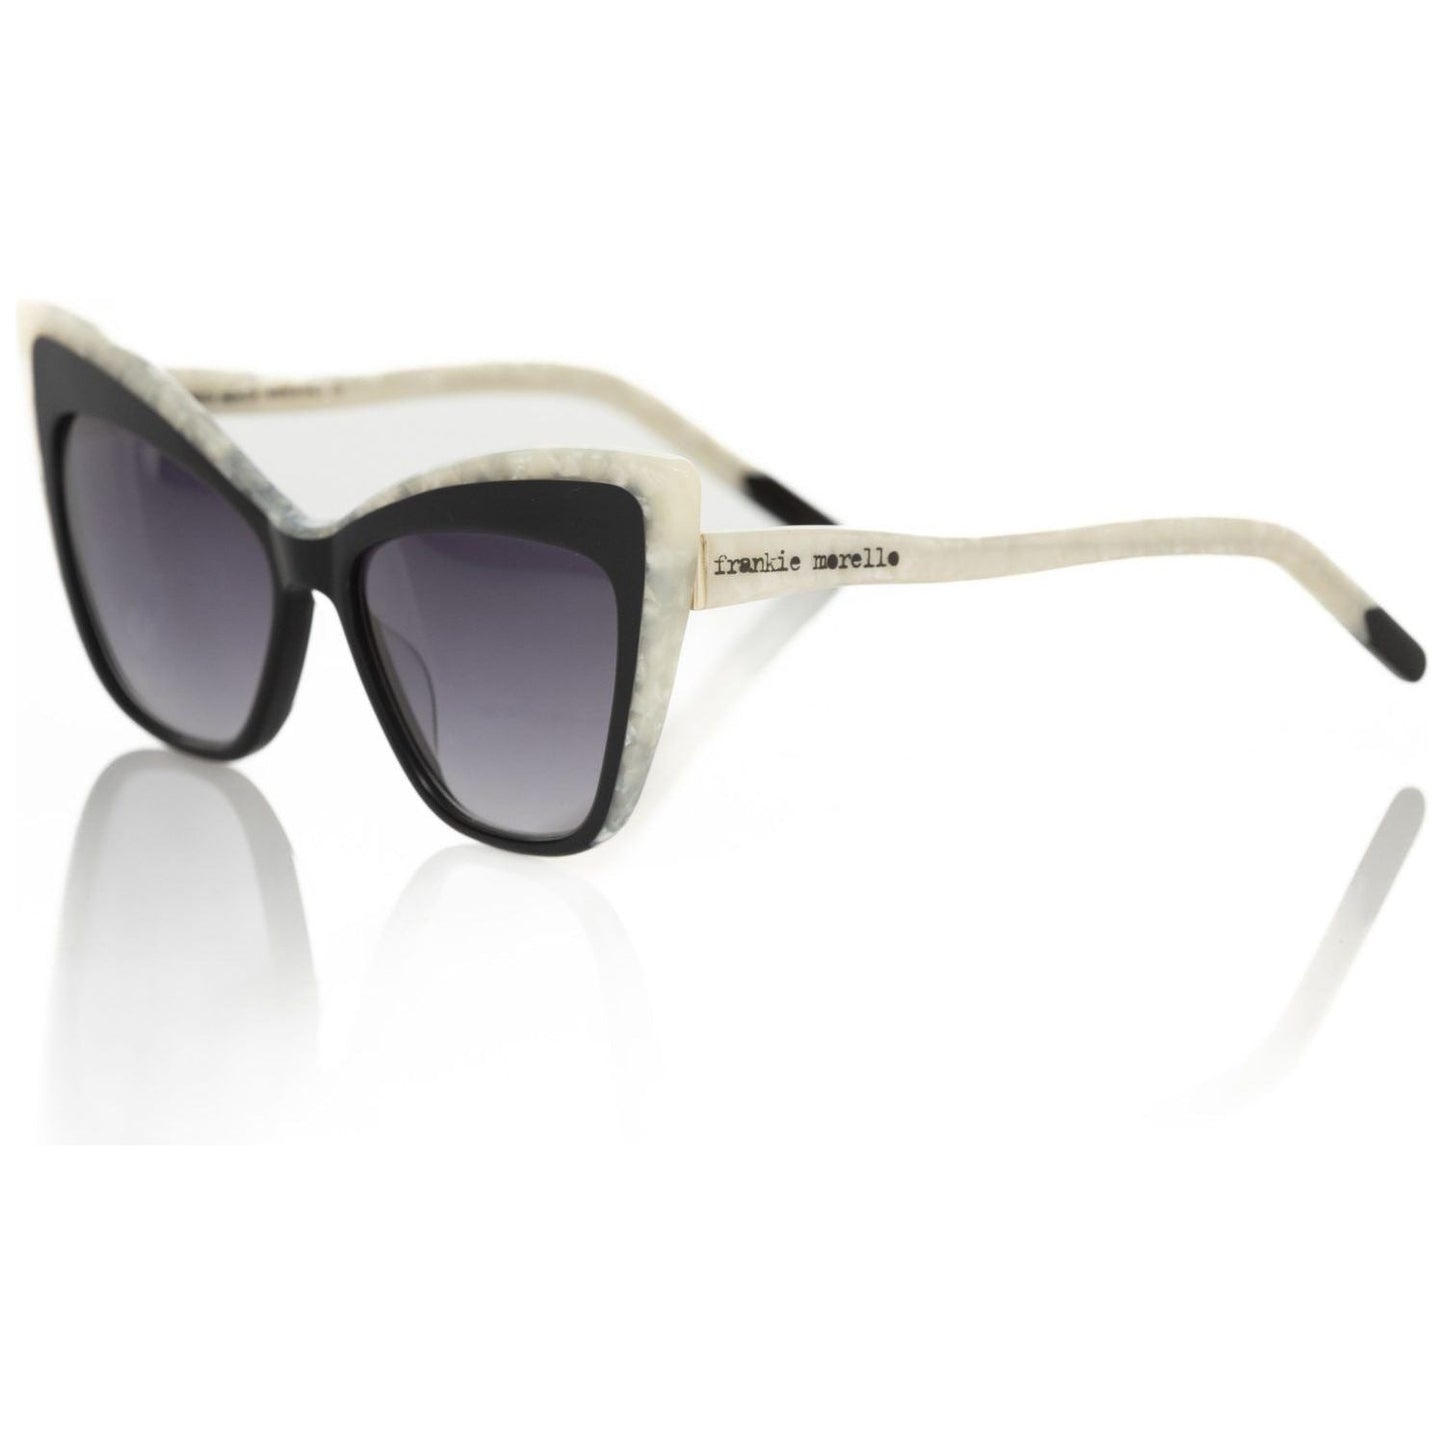 Frankie Morello Chic Cat Eye Sunglasses with Pearly Accents black-acetate-sunglasses-2